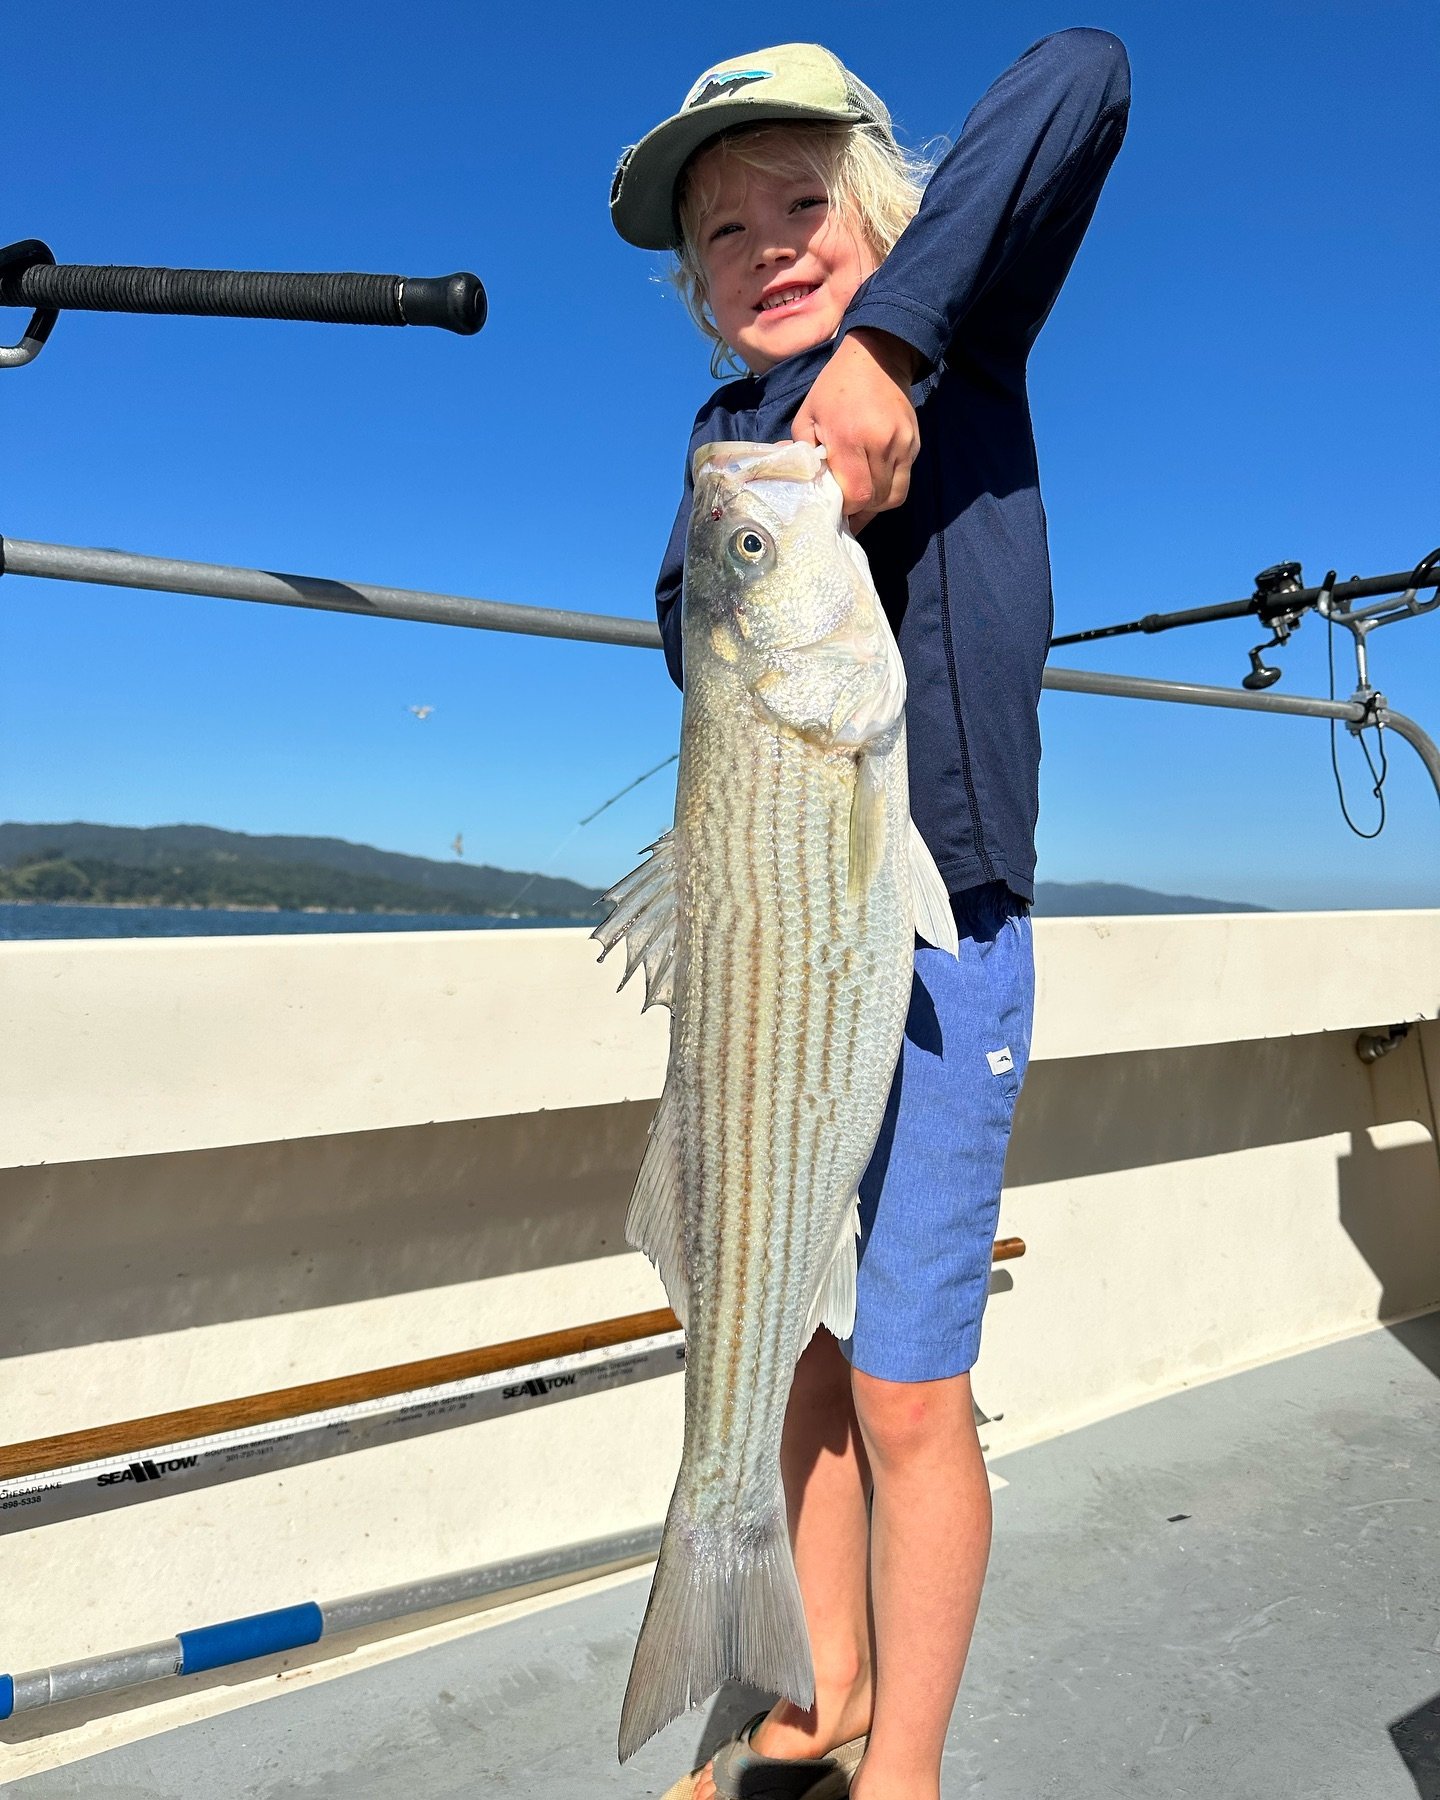 This kid comes out every year and always catches something big! Today he got and big old striped bass and two nice halibut! #goldenstateguideservice #scallywag #fishemeryville